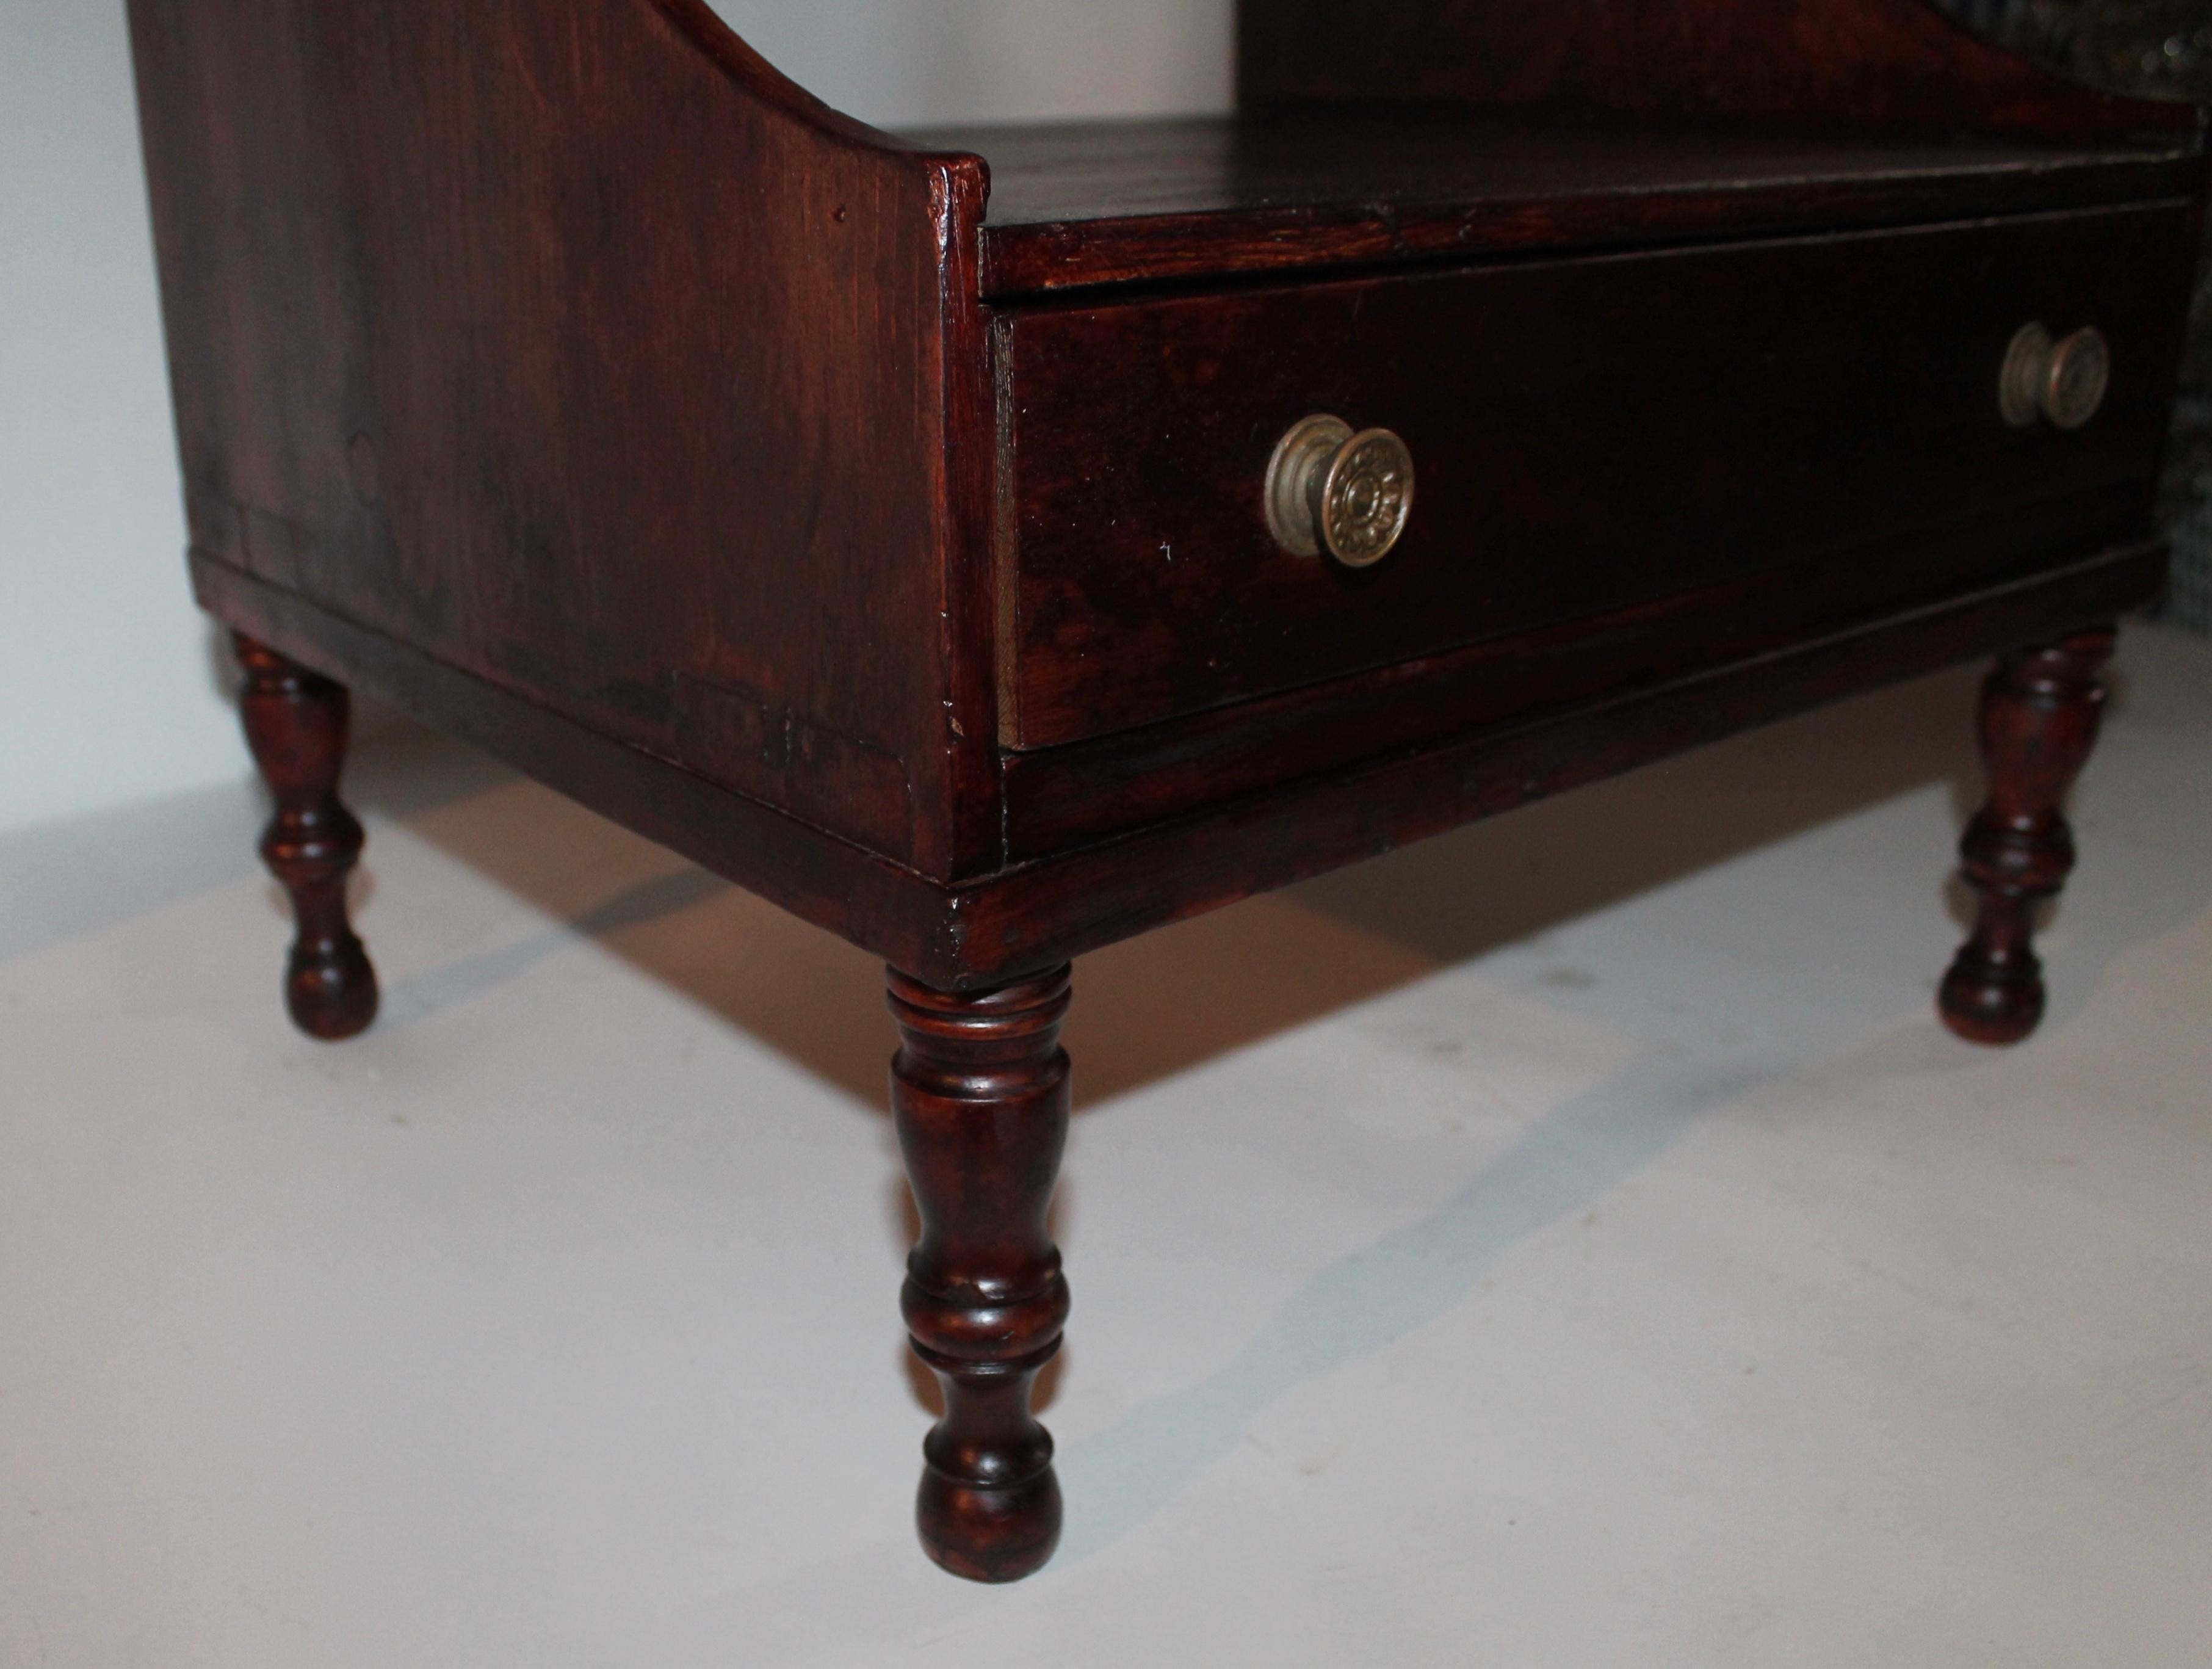 Hand-Crafted 19th Century Side Table from New England